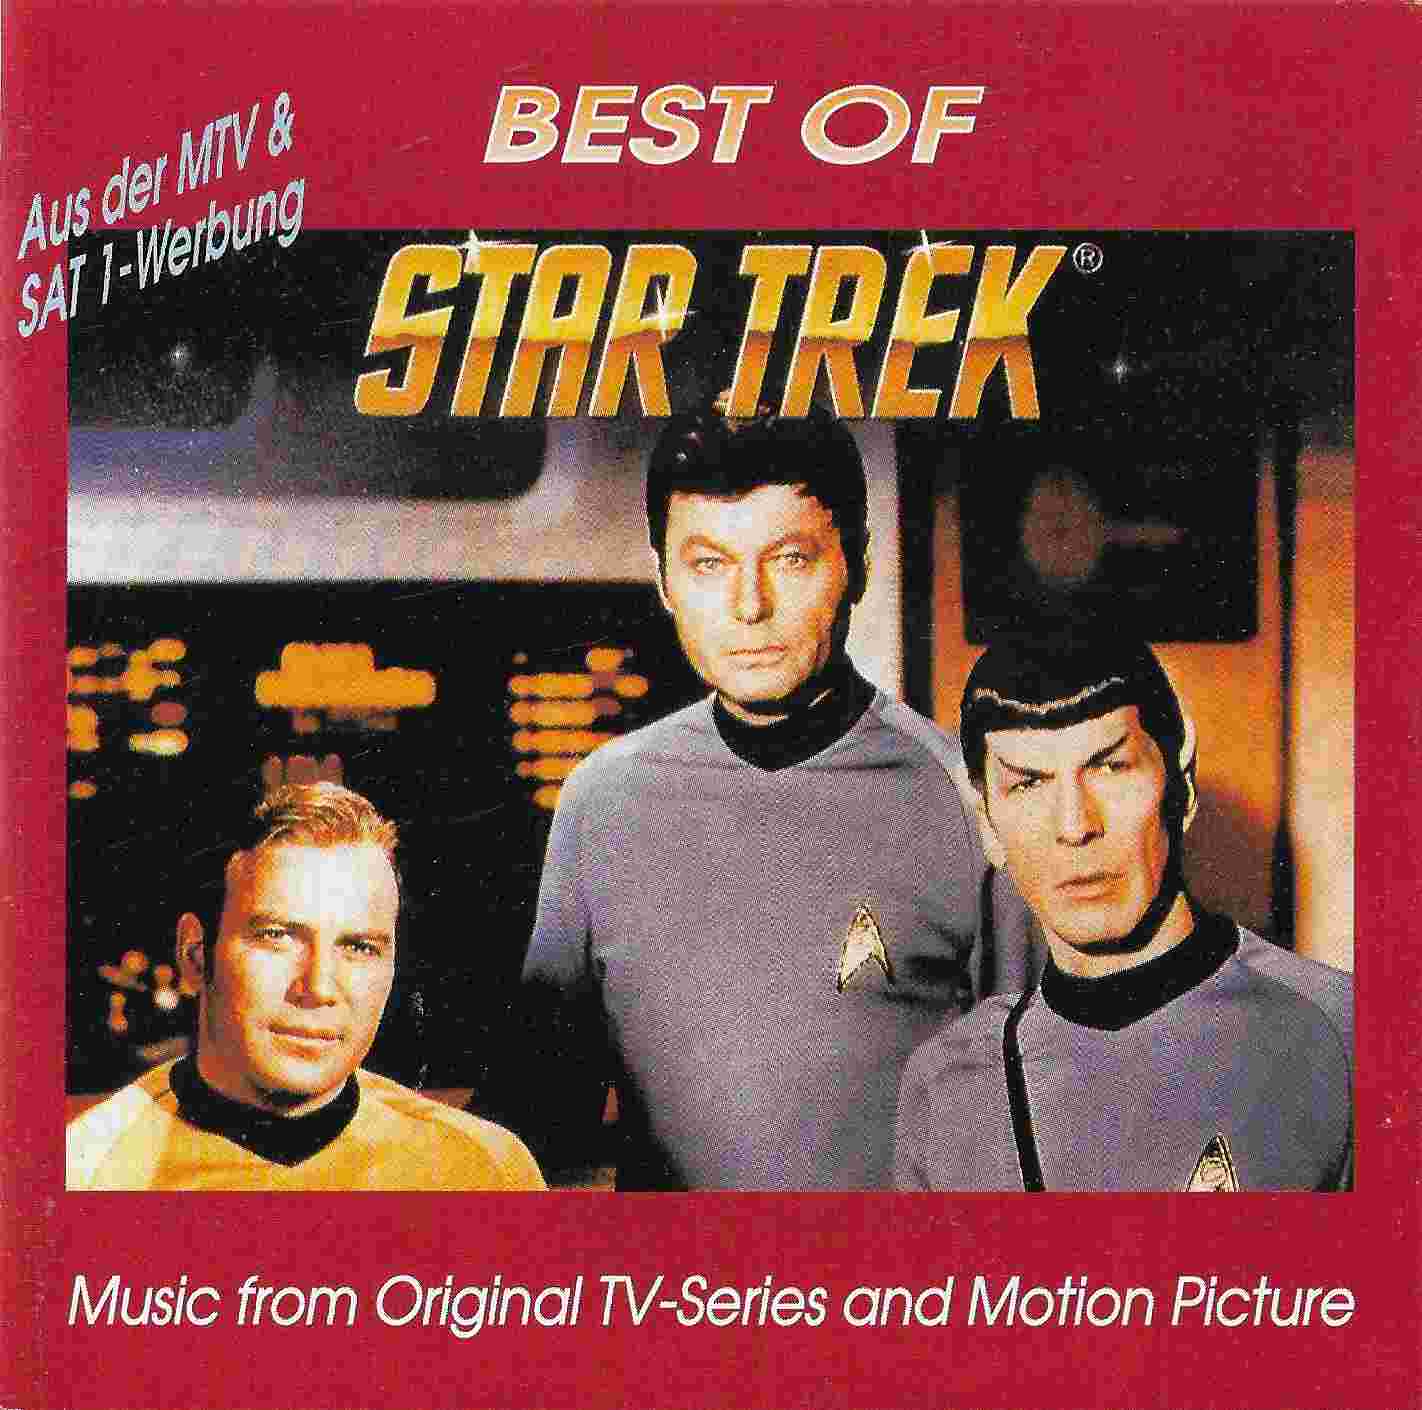 Picture of The best of star trek by artist Alexander Courage / Various from the BBC cds - Records and Tapes library